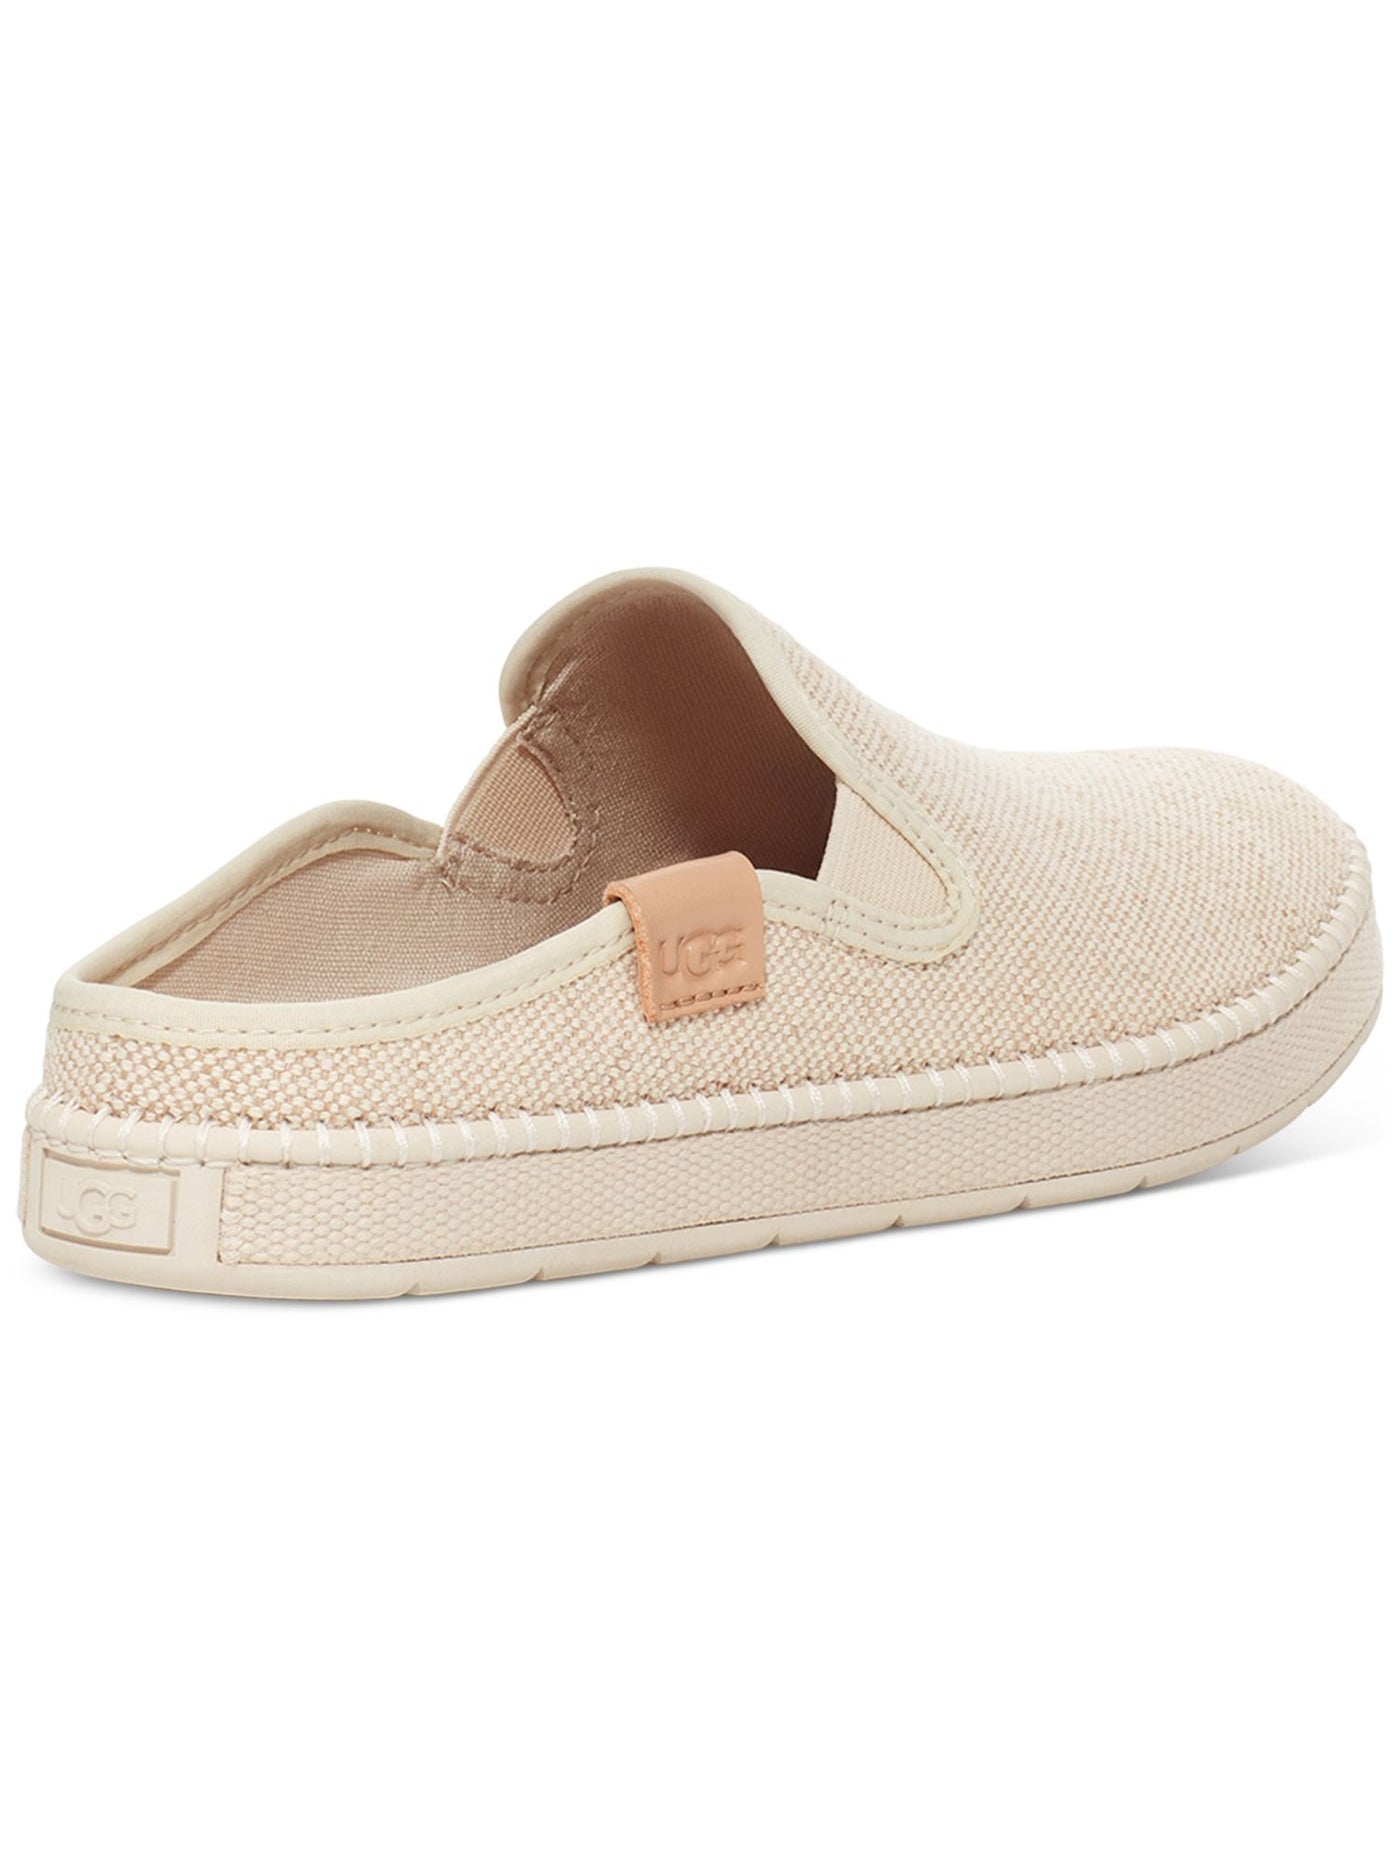 UGG Womens Beige Woven Goring Removable Insole Cushioned Delu Round Toe Platform Slip On Mules 7.5